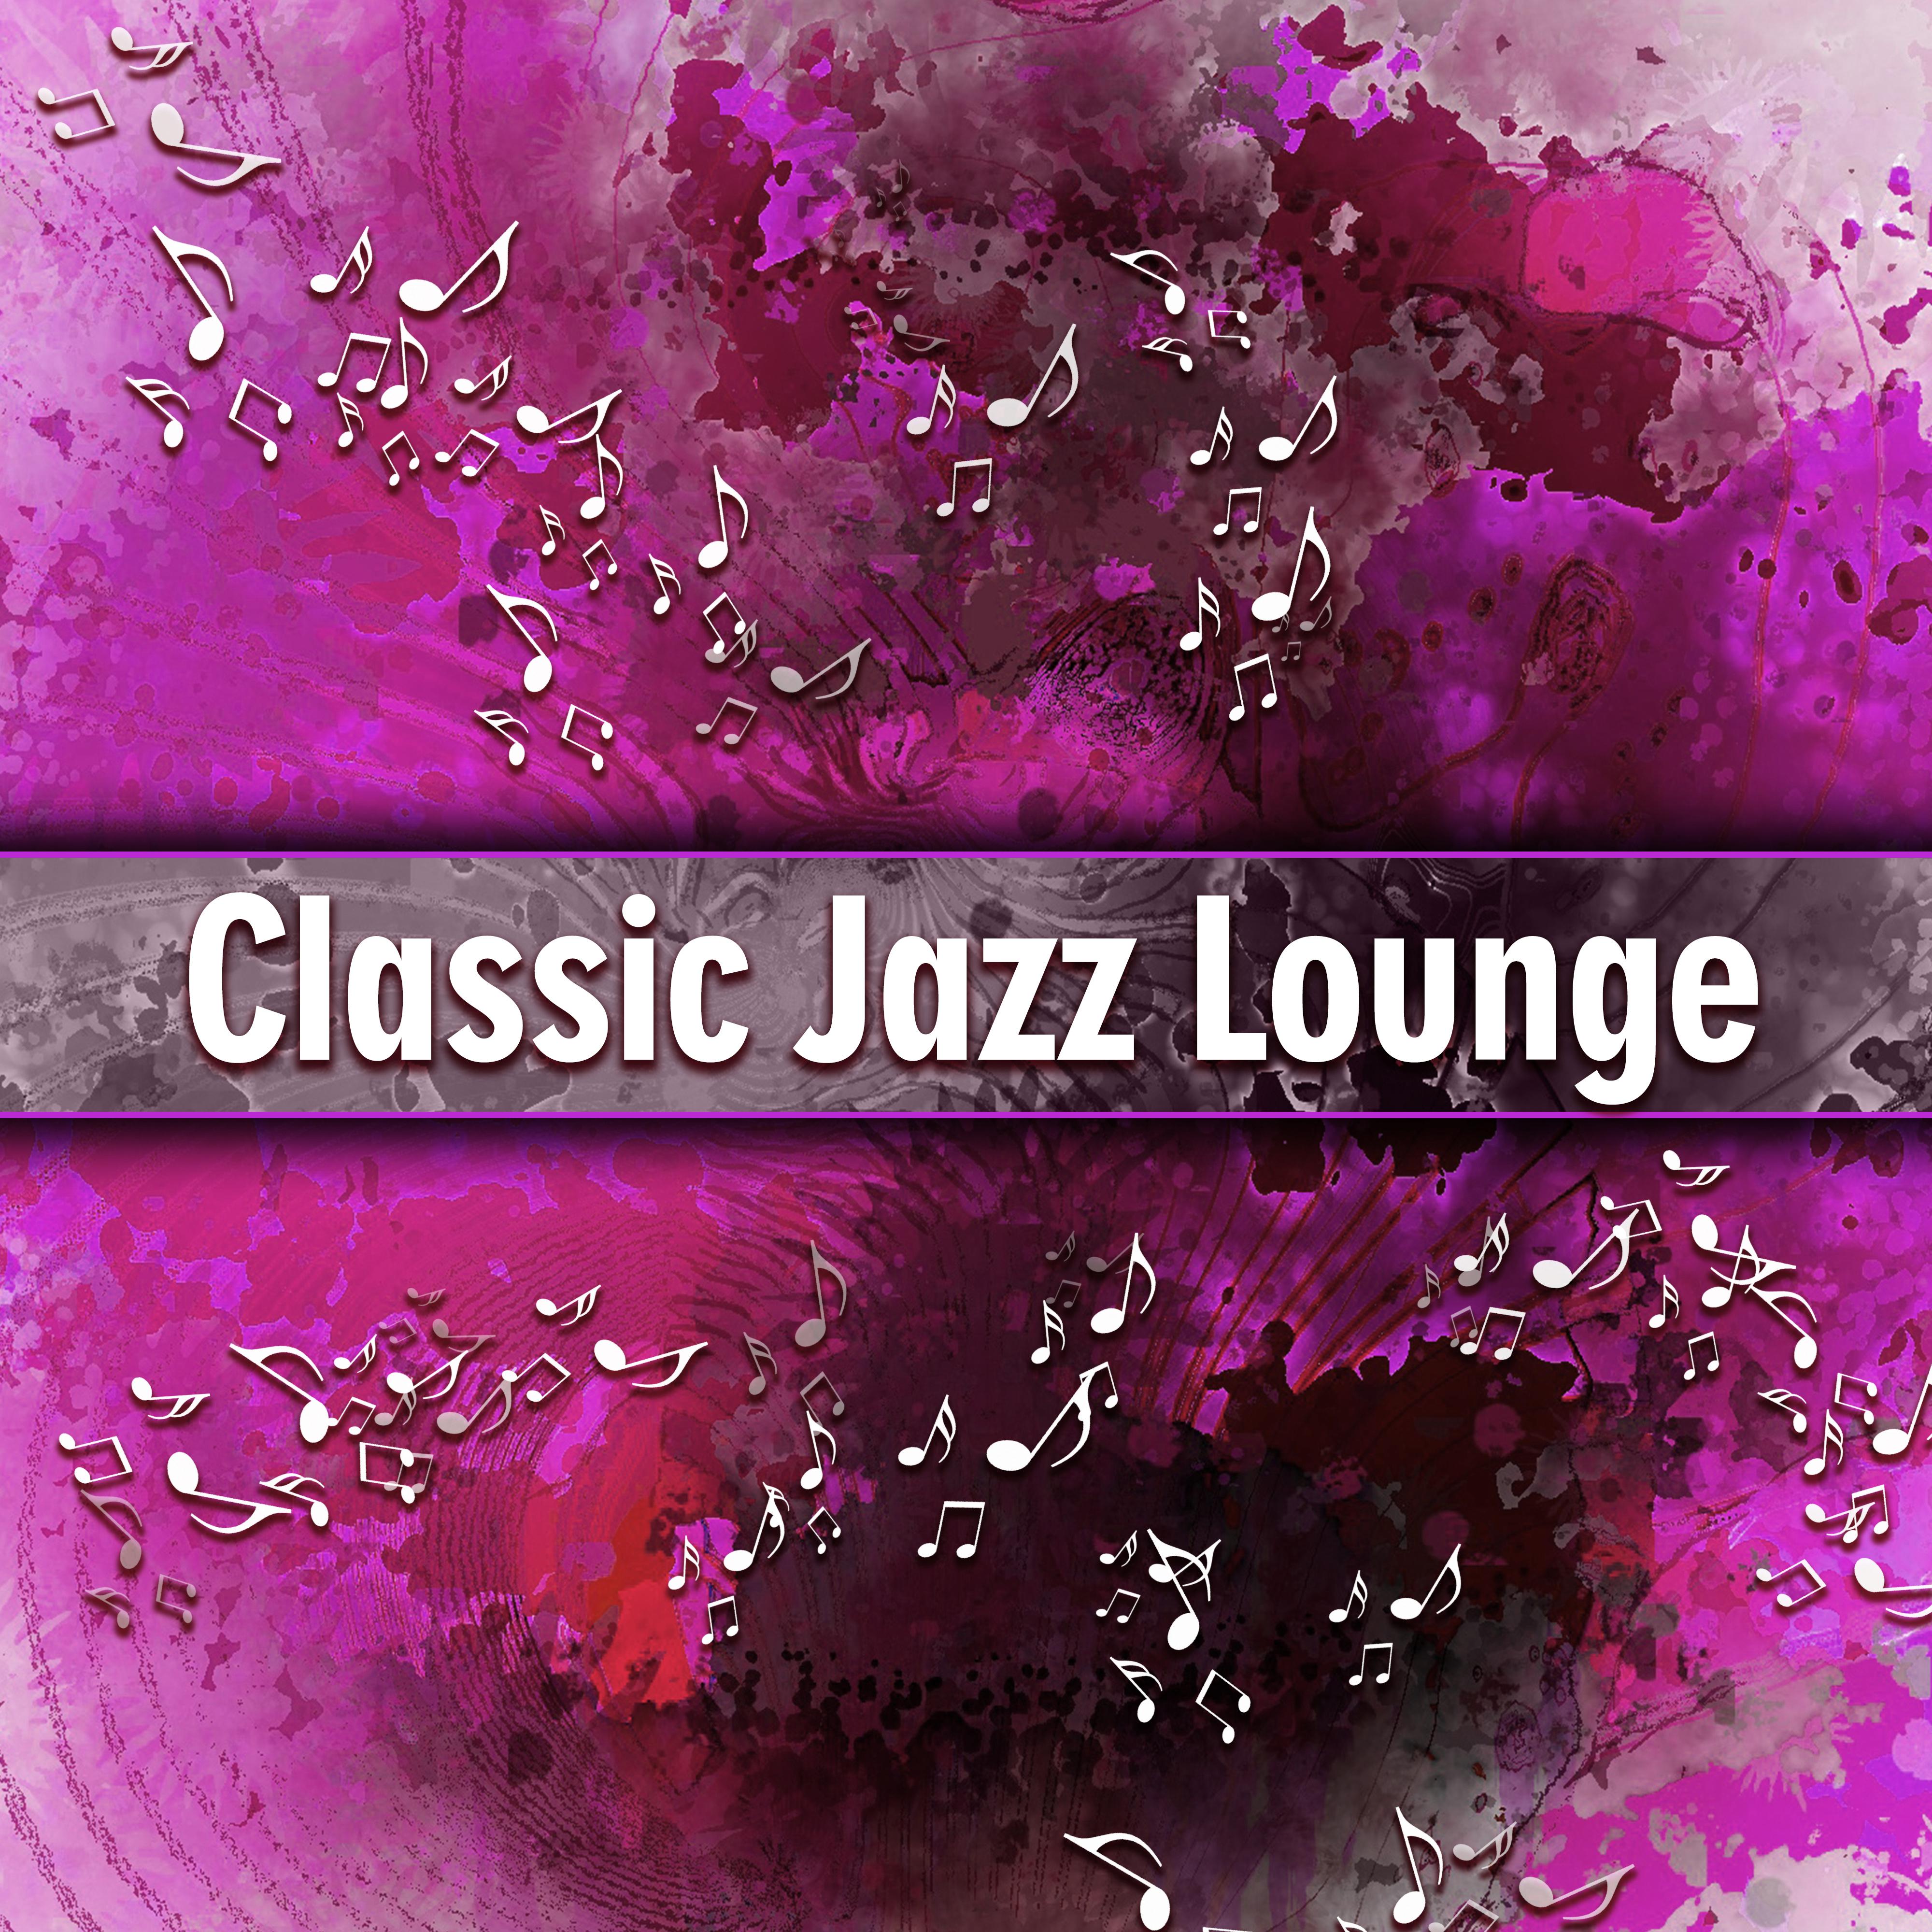 Classic Jazz Lounge  Ambient Instrumental Music, Smooth Jazz, Simple Piano Songs